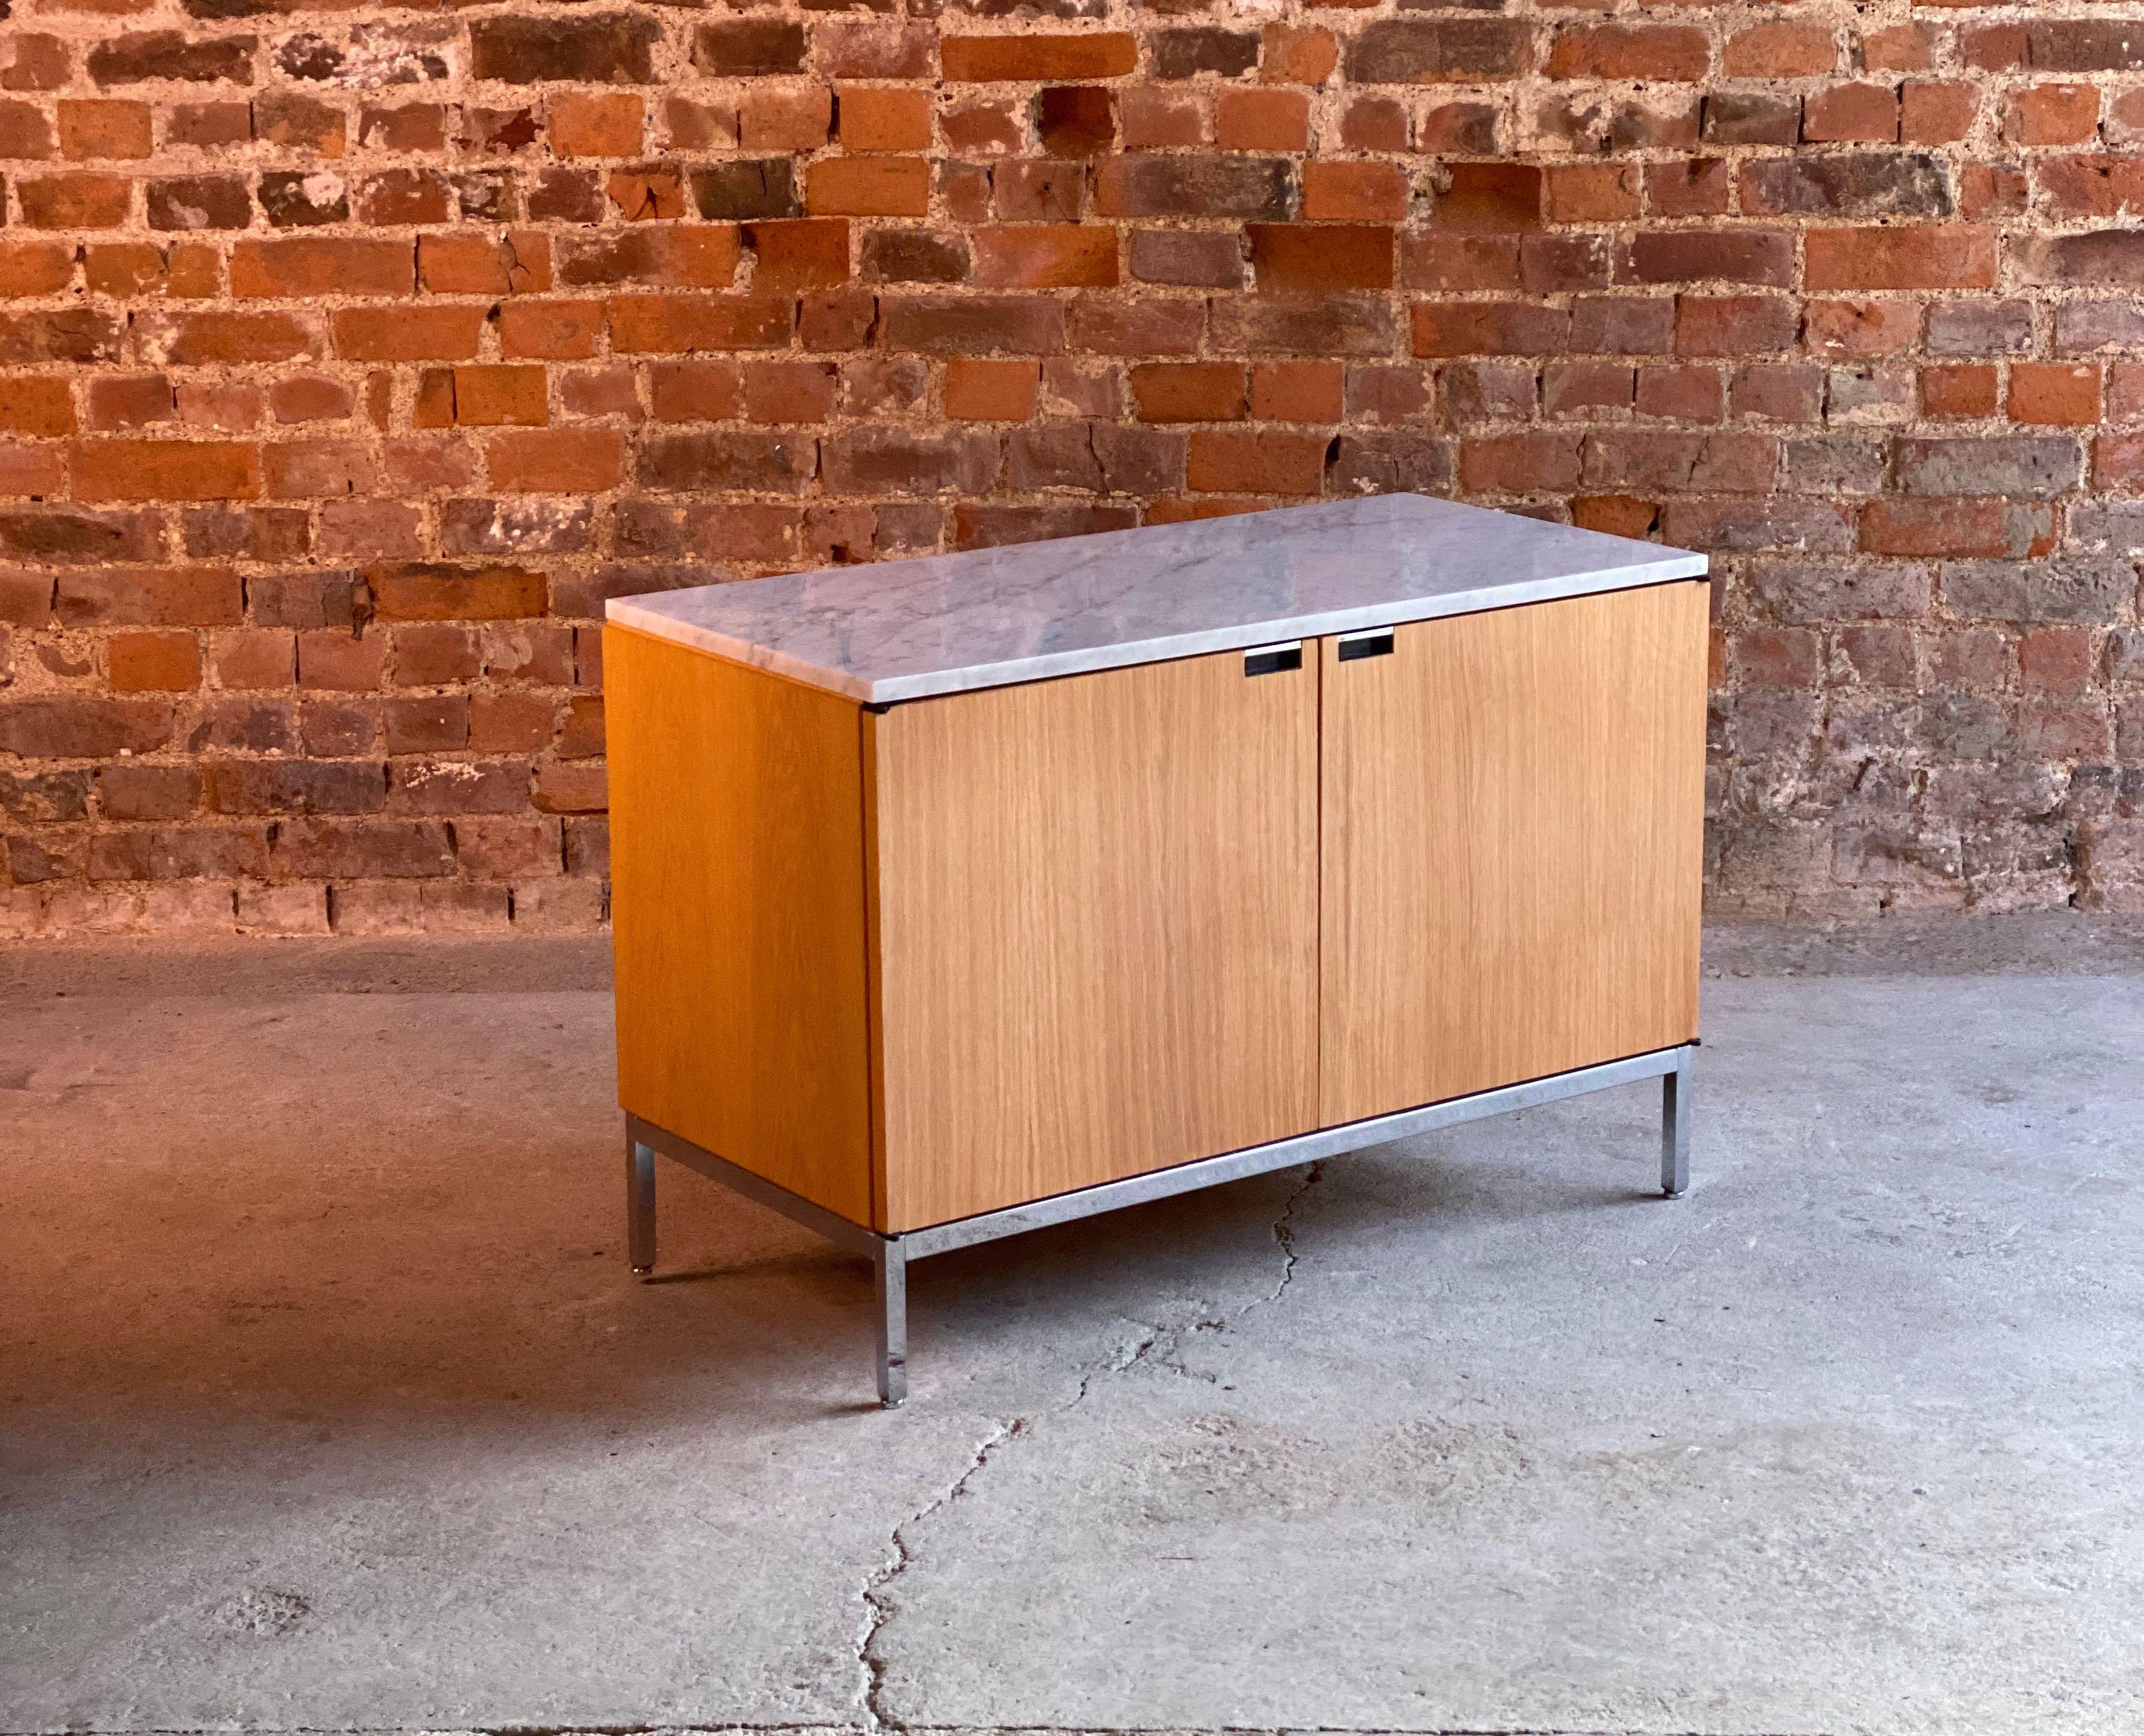 Florence Knoll Marble Credenza by Knoll oak two-door USA circa 1970

Florence Knoll marble topped oak two-door credenza by Knoll studio circa 1970. Th credenza is finished with rectangular white Arabescato marble top, over two doors with chrome